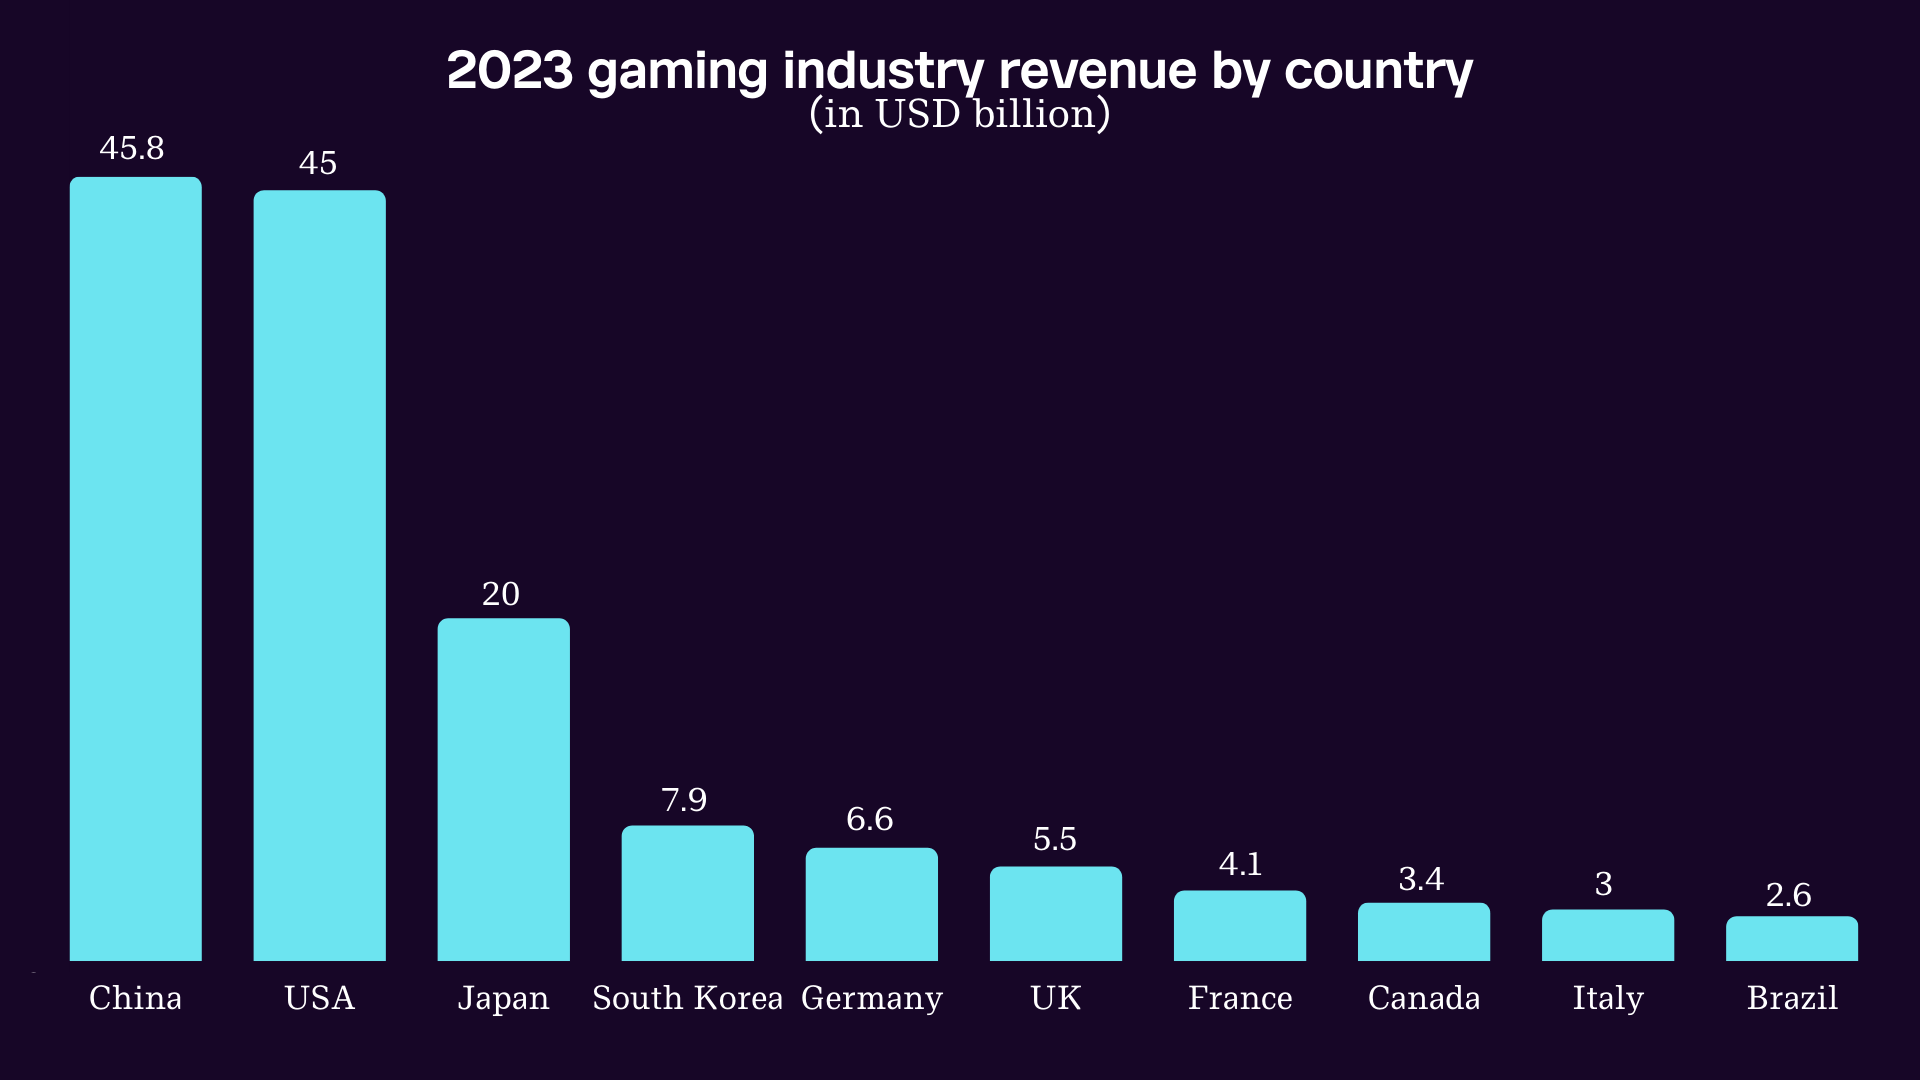 2023 gaming industry revenue by country
(in USD billion)